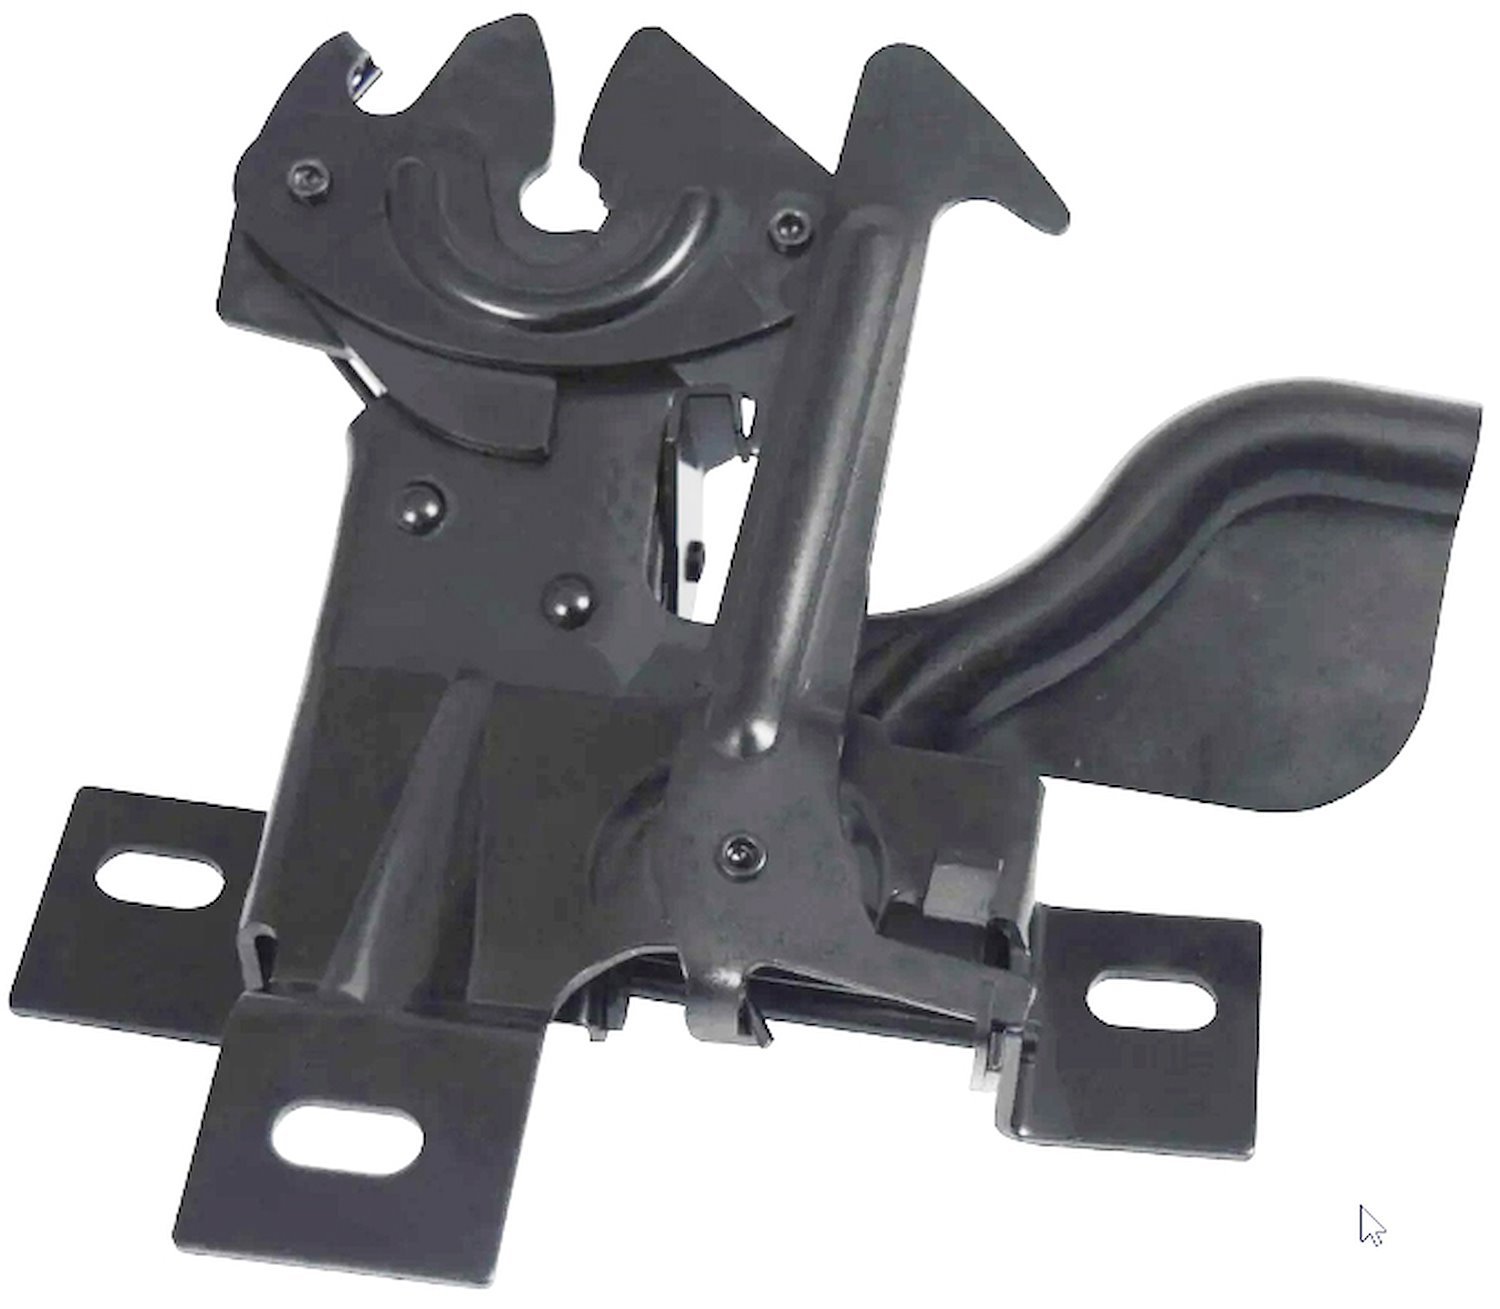 HO15-67L Hood Latch for 1967-1972 Ford F100 Truck